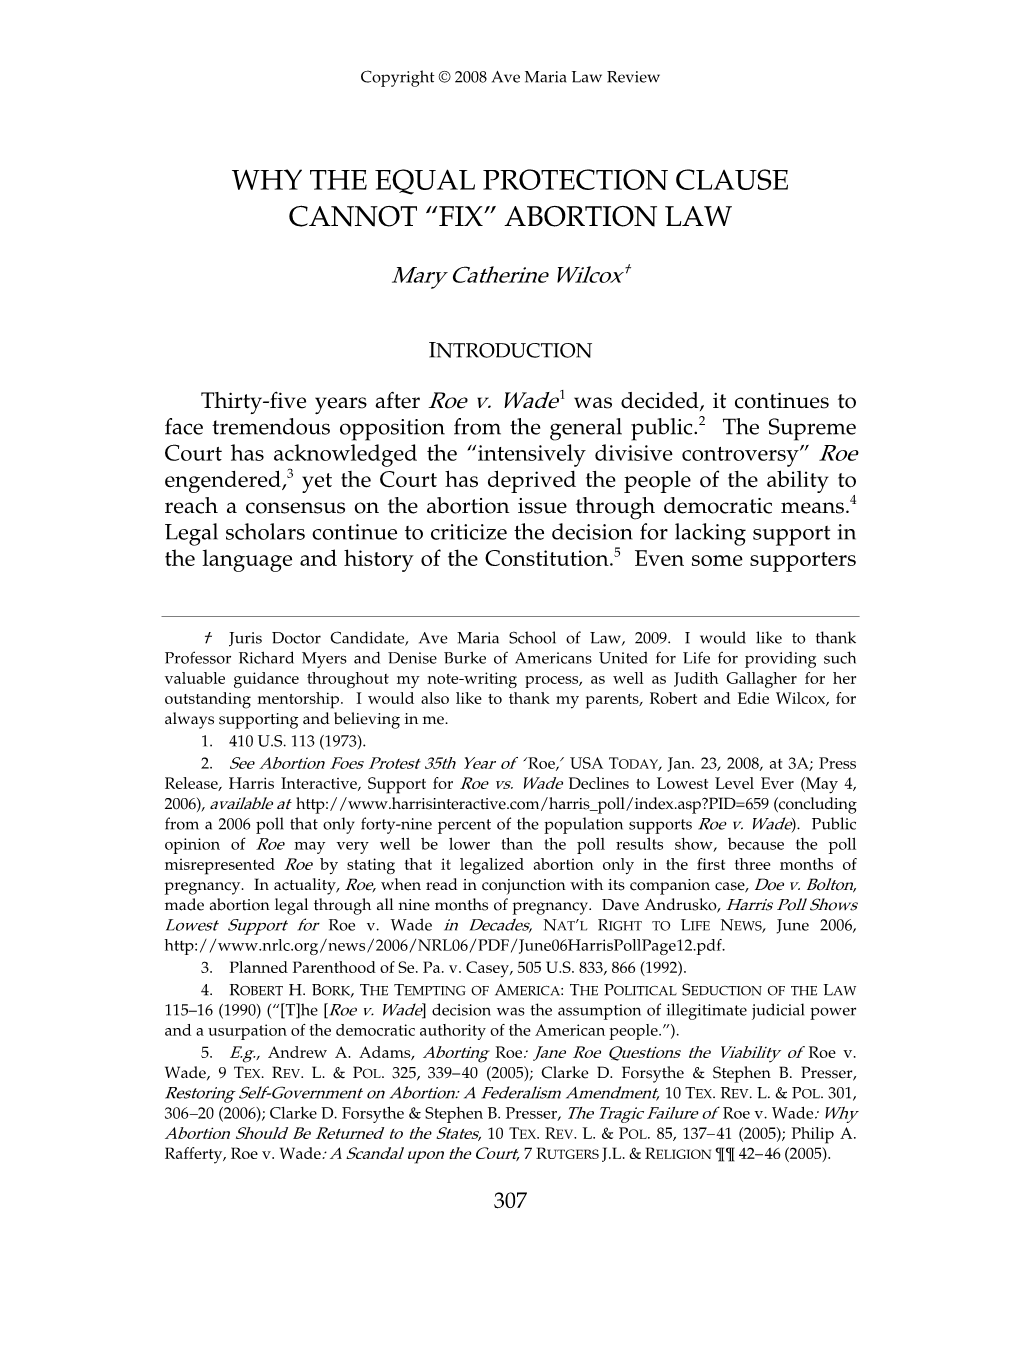 Why the Equal Protection Clause Cannot “Fix” Abortion Law